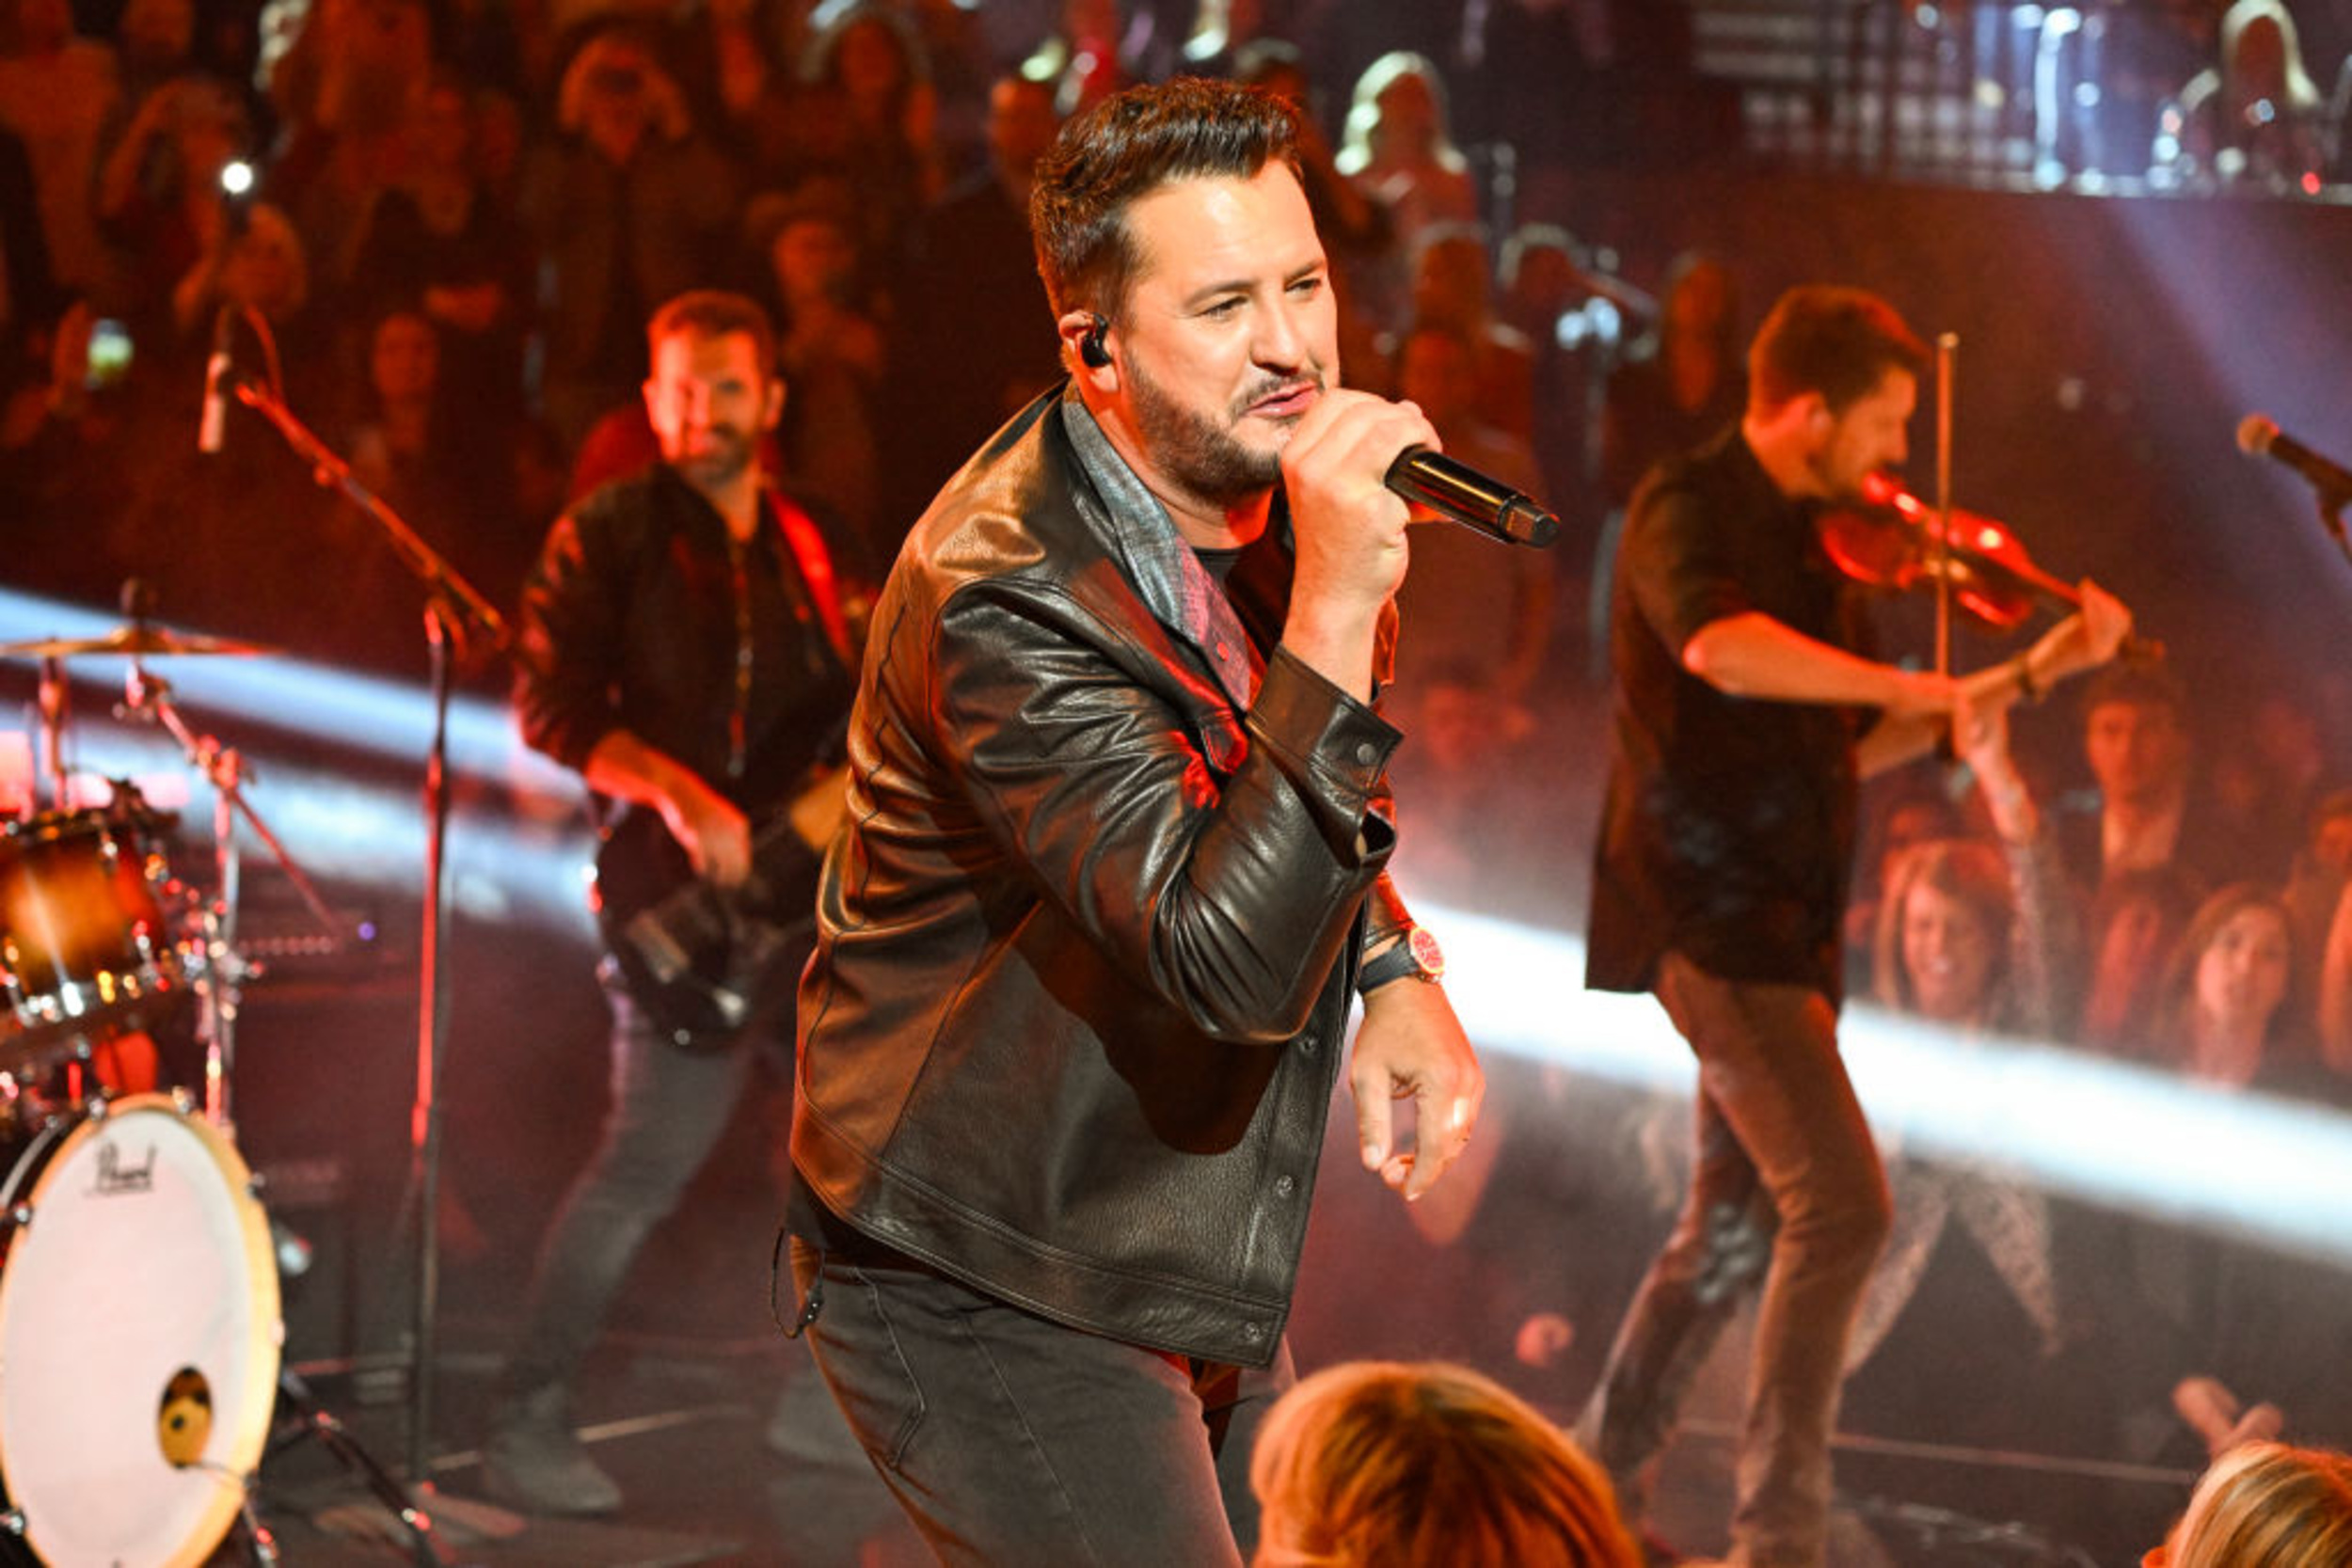 <p>In 2013, Luke Bryan notched a #1 hit with this contemplative song about the aftermath of losing a loved one. What fans didn't know at the time, though, was that the song was co-written by Chris Stapleton, who was gearing up to become one of country music's most beloved voices. </p><p>You may also like: <a href='https://www.yardbarker.com/entertainment/articles/20_facts_you_might_not_know_about_young_frankenstein/s1__37661038'>20 facts you might not know about 'Young Frankenstein'</a></p>